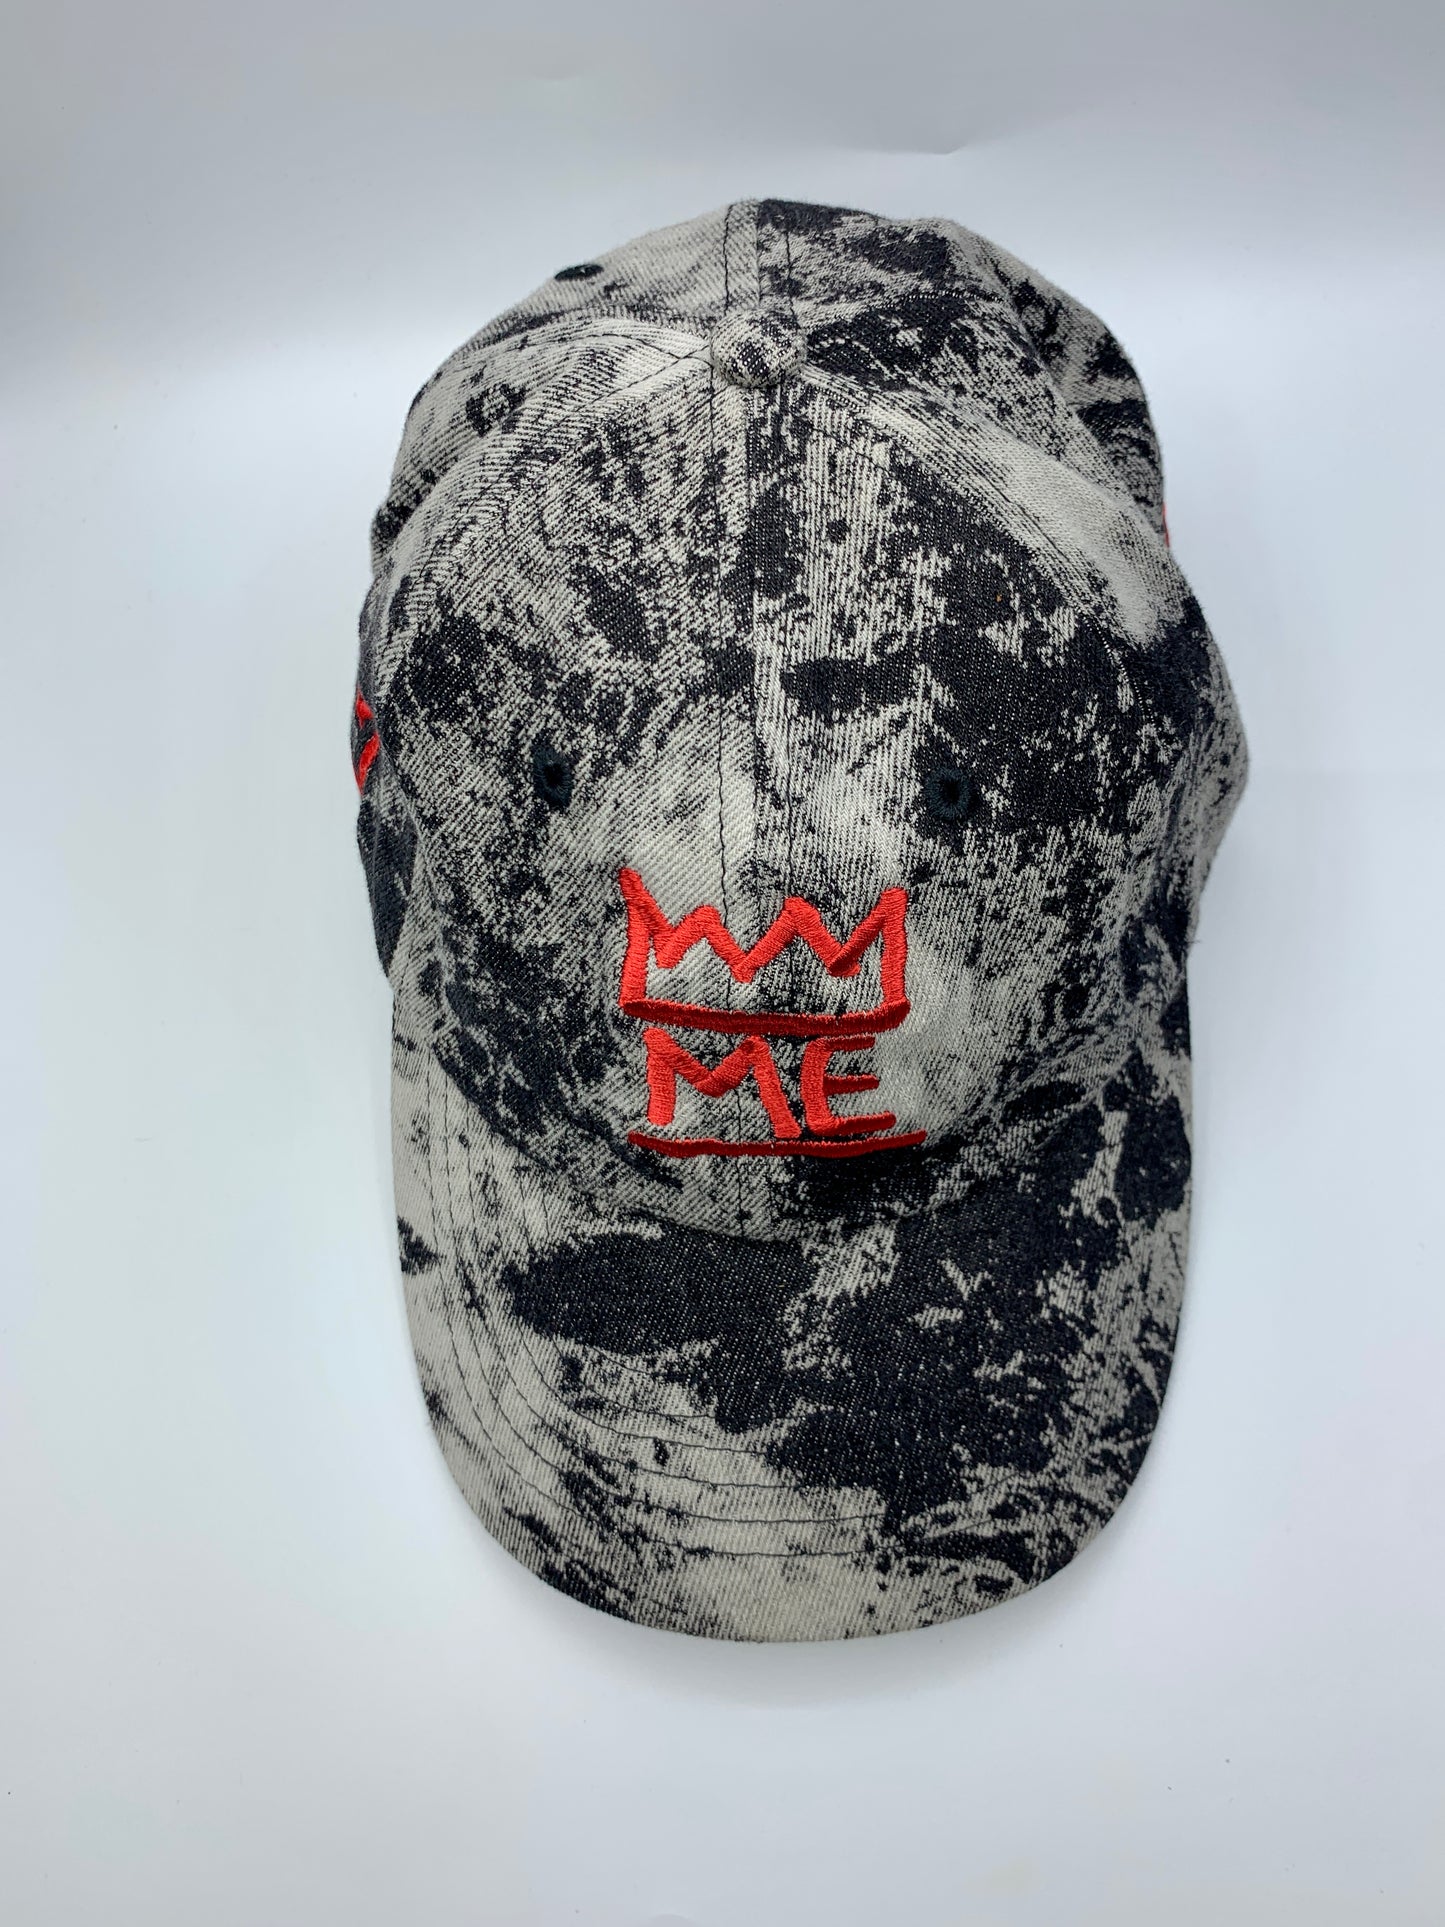 Two-Tone Denim Dad Hat with Red Krown